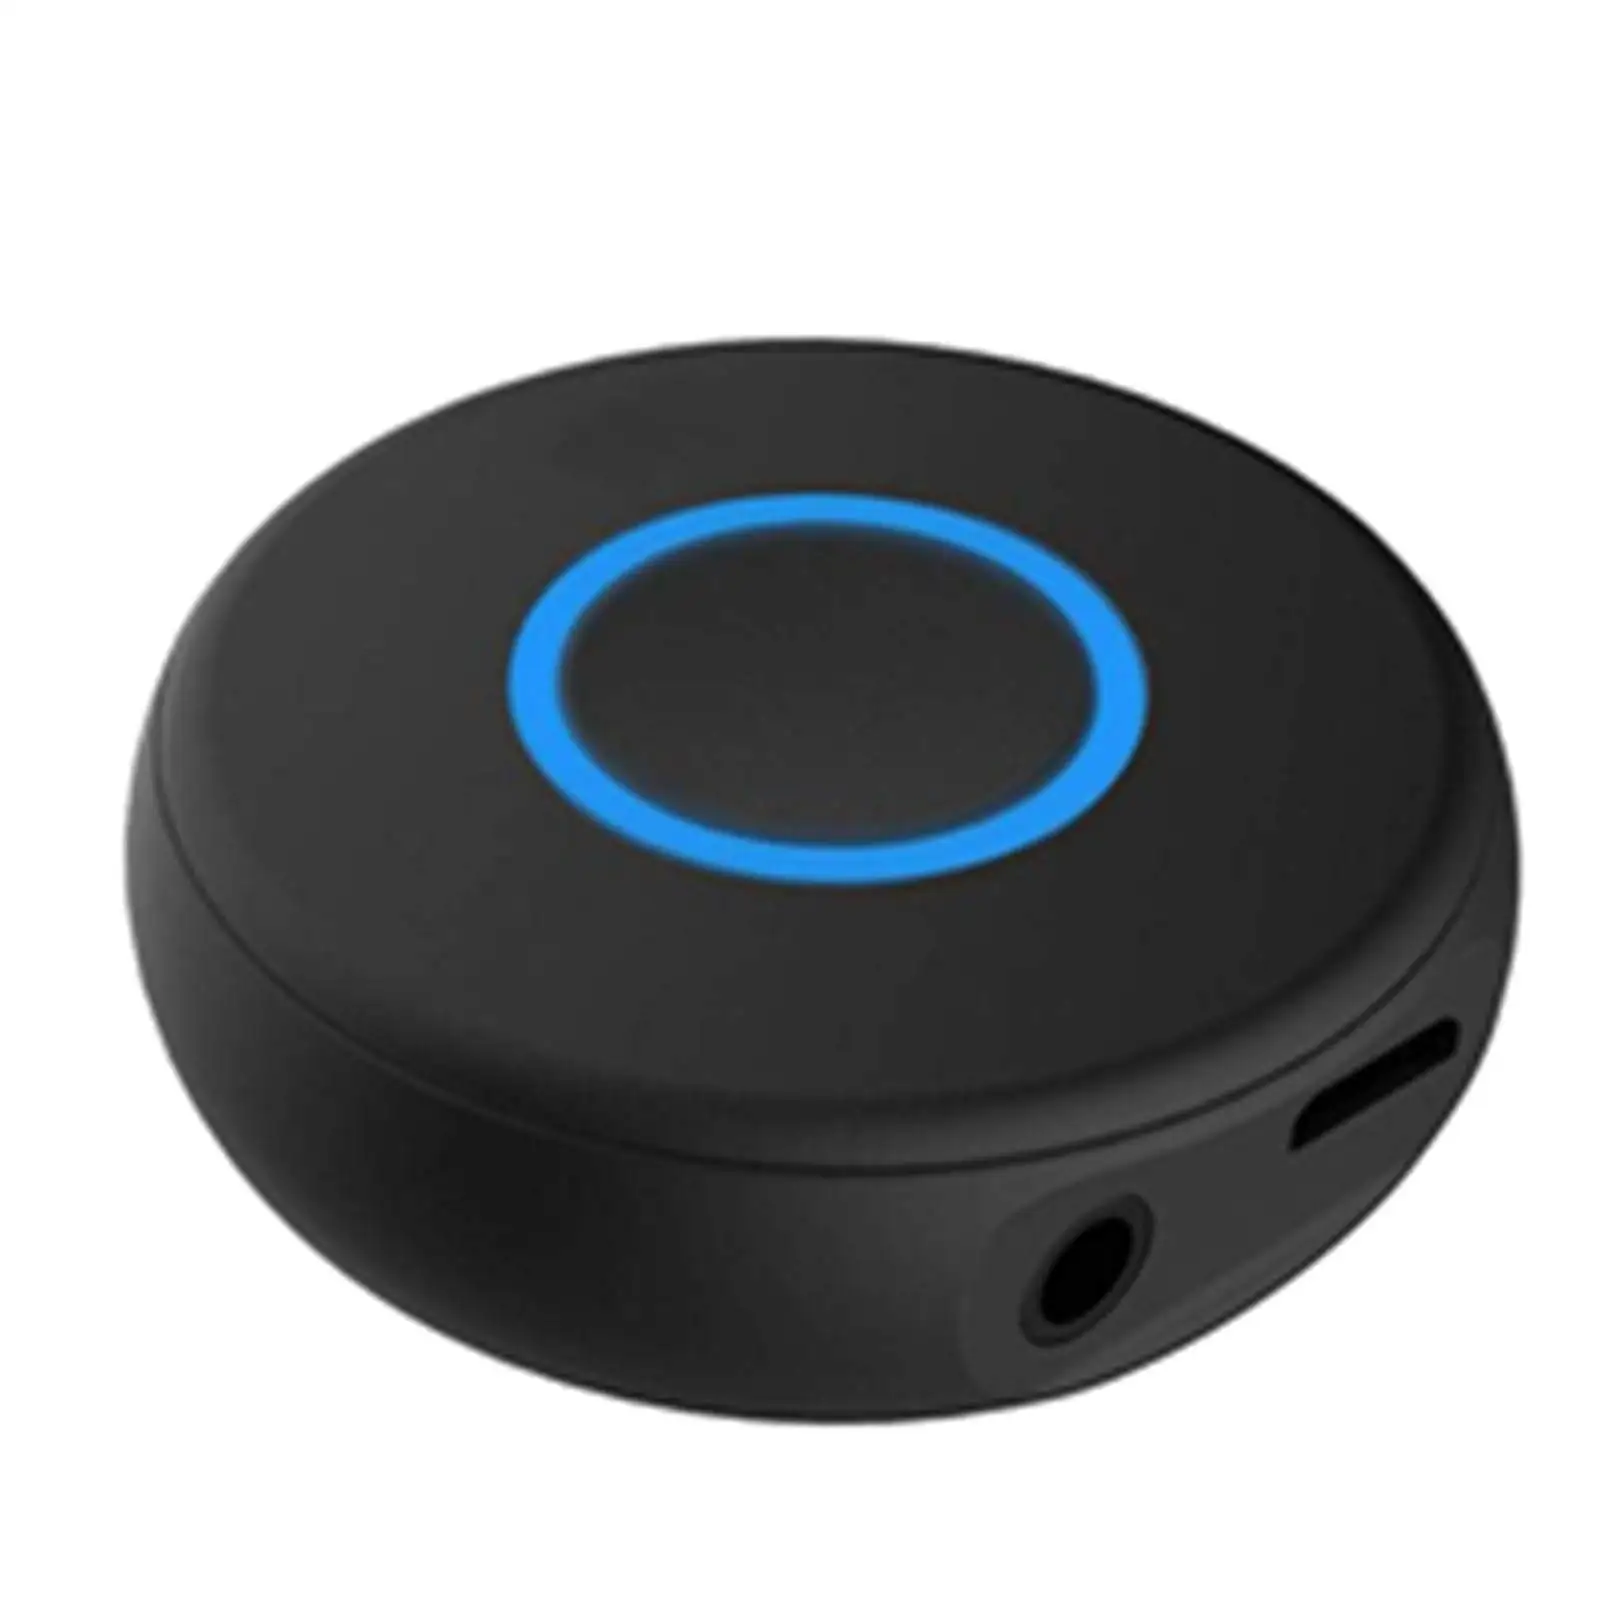 Bluetooth Aux Adapter Transmitter Receiver Wireless Audio Adapter No Audio Delay for TV Headphones Speaker PC Portable